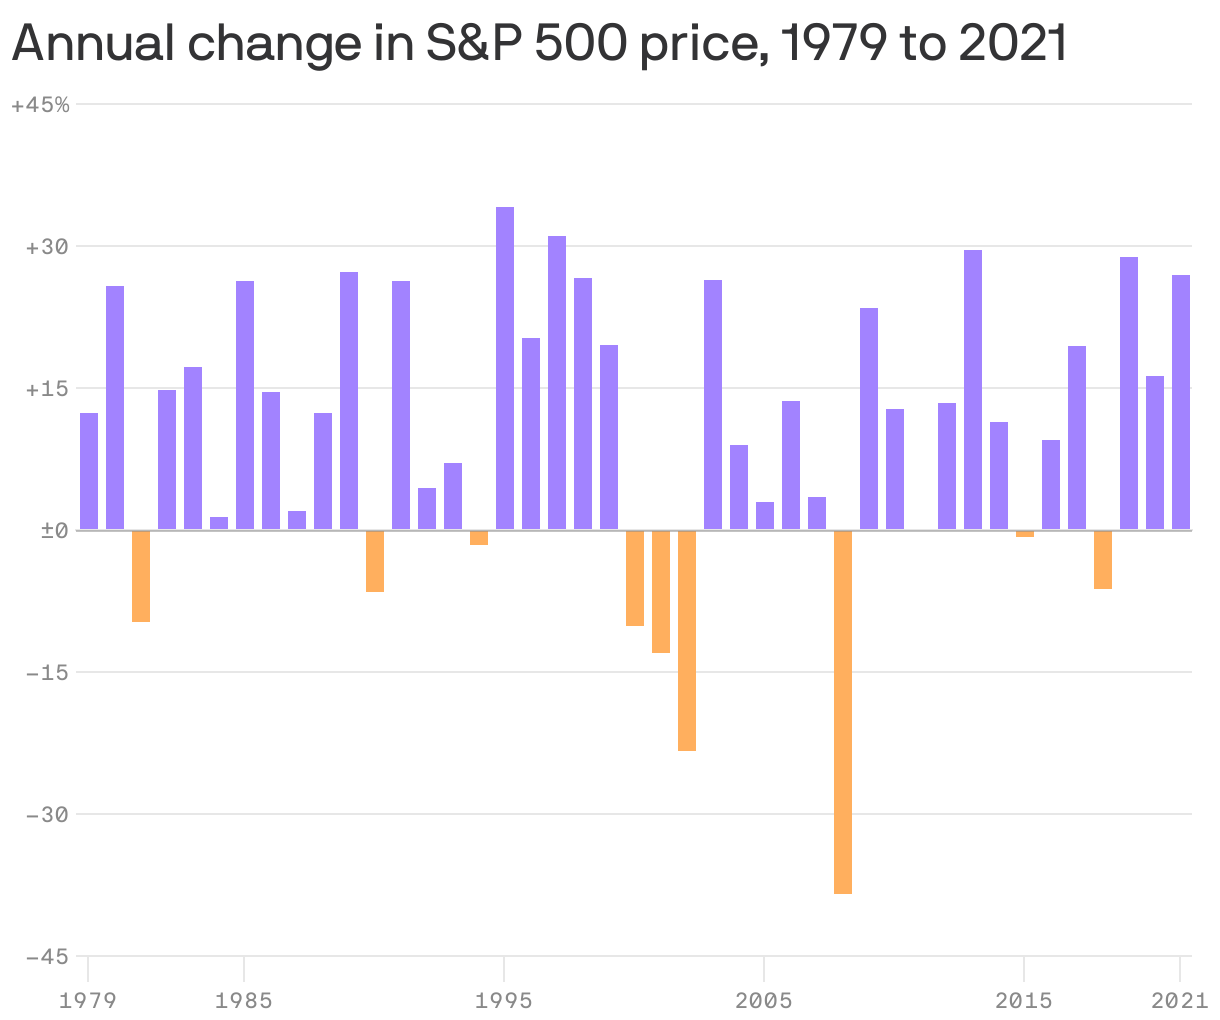 Annual change in S&P 500 price, 1979 to 2021